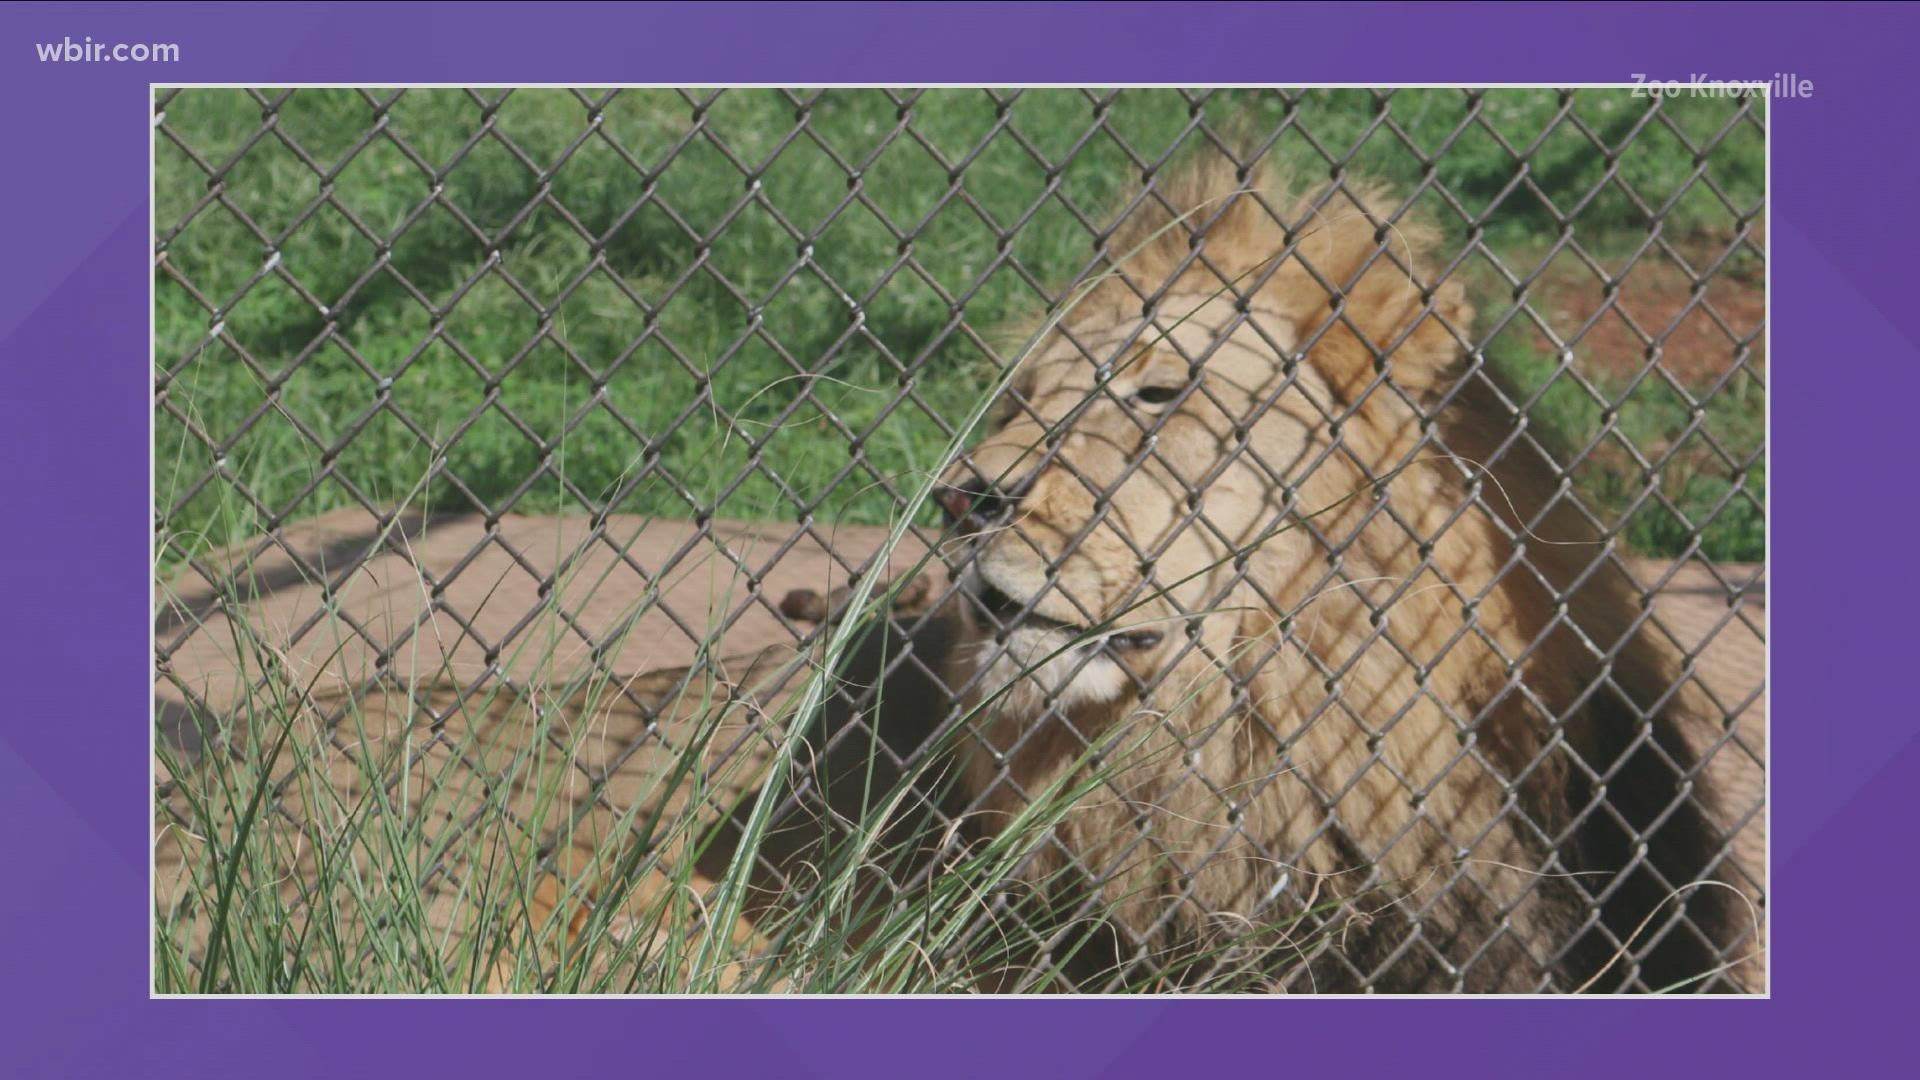 The lion was born at Zoo Knoxville in 2006. It had to be humanely euthanized due to age-related health issues, the zoo said.